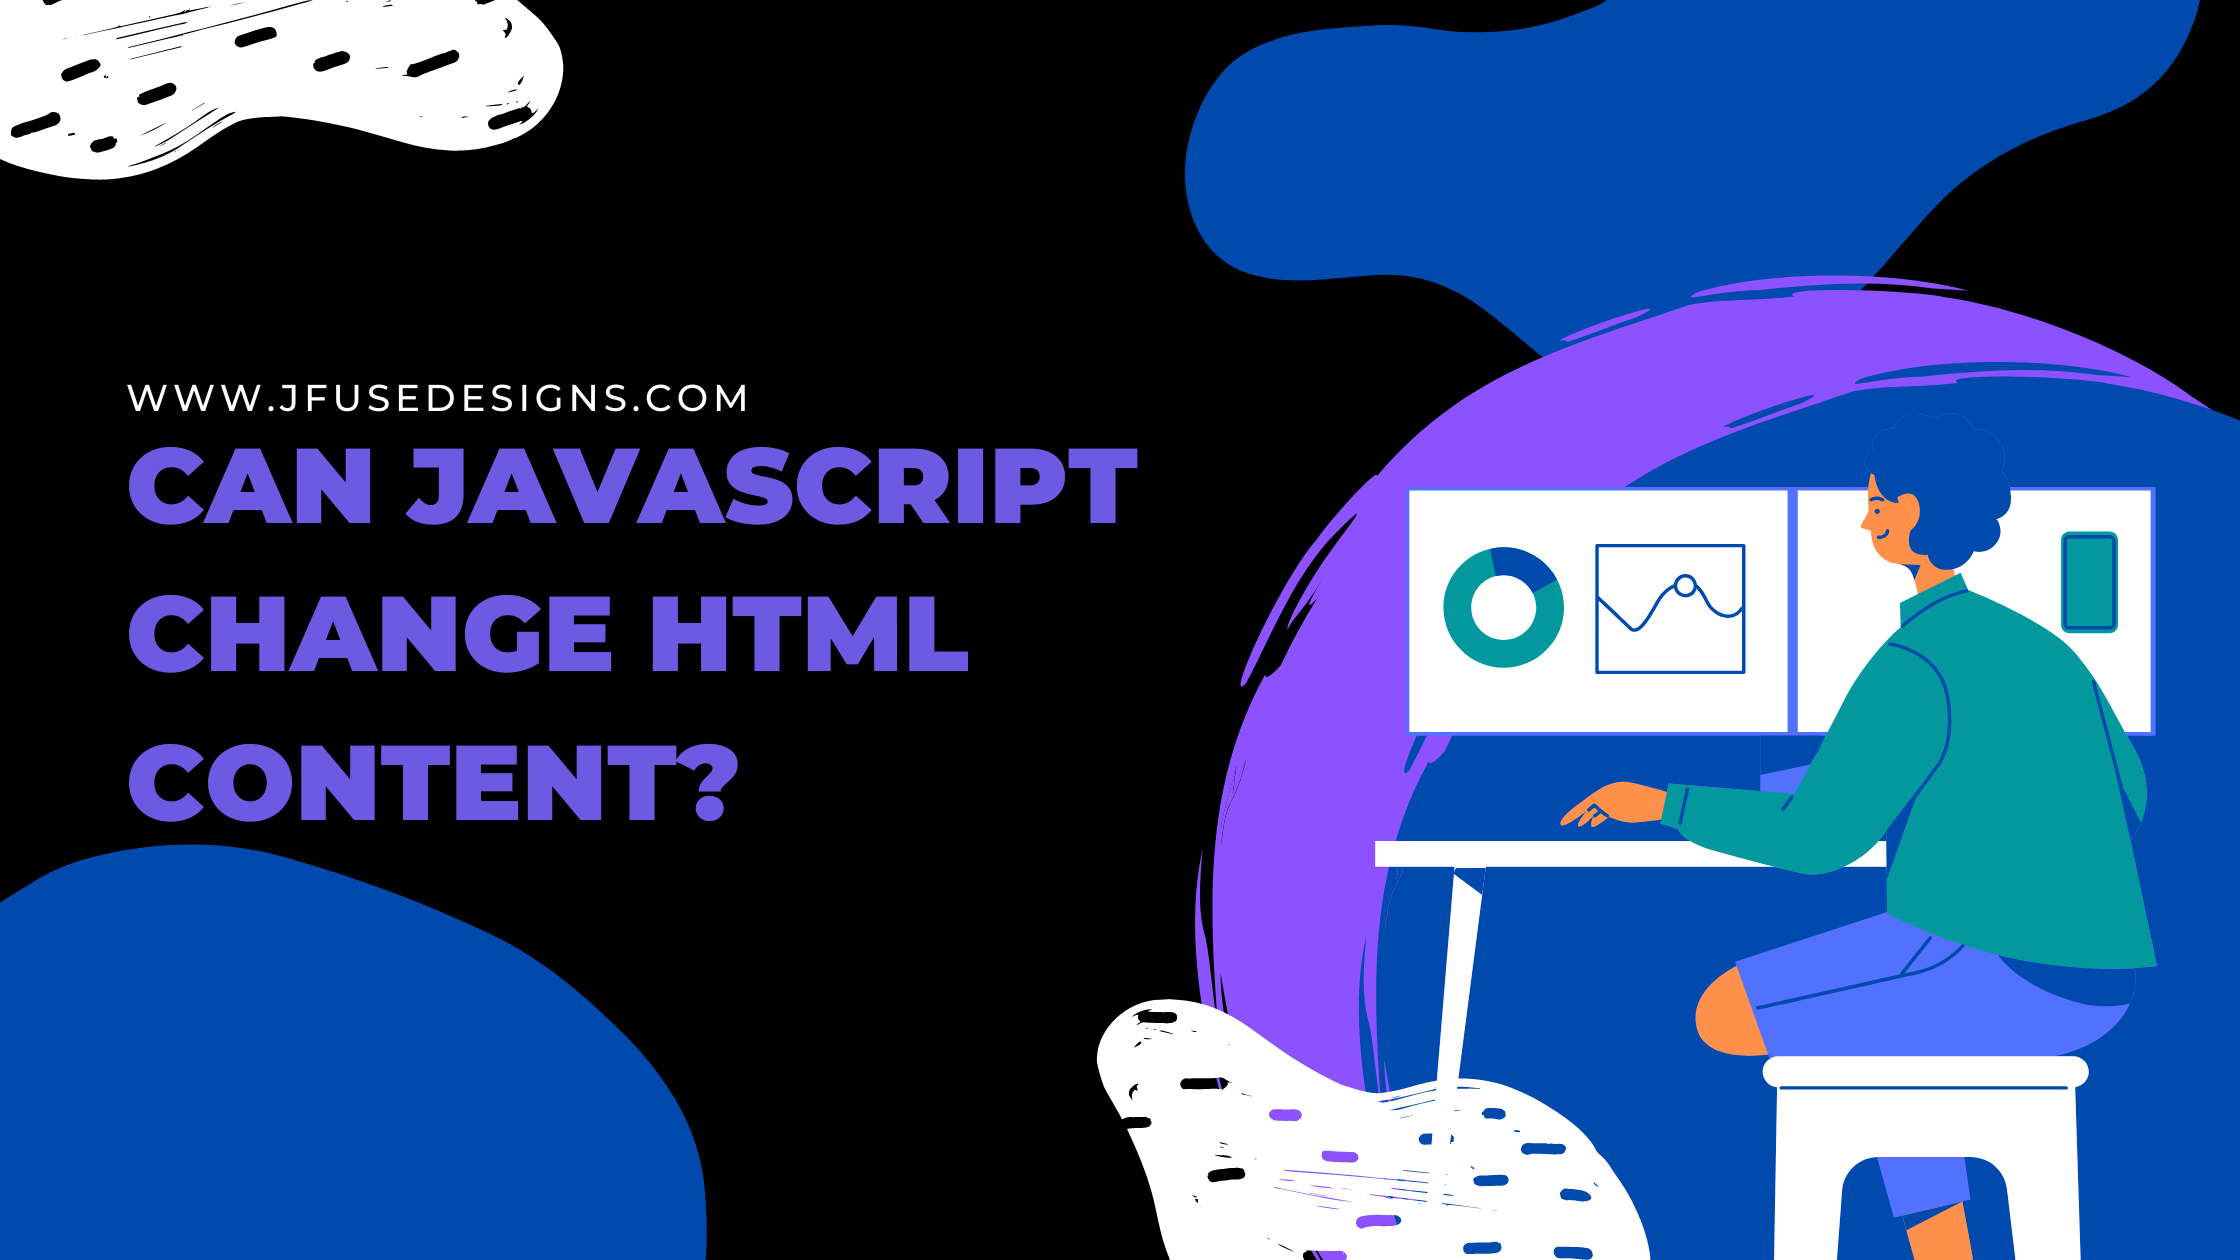 use javascript to change HTML content!